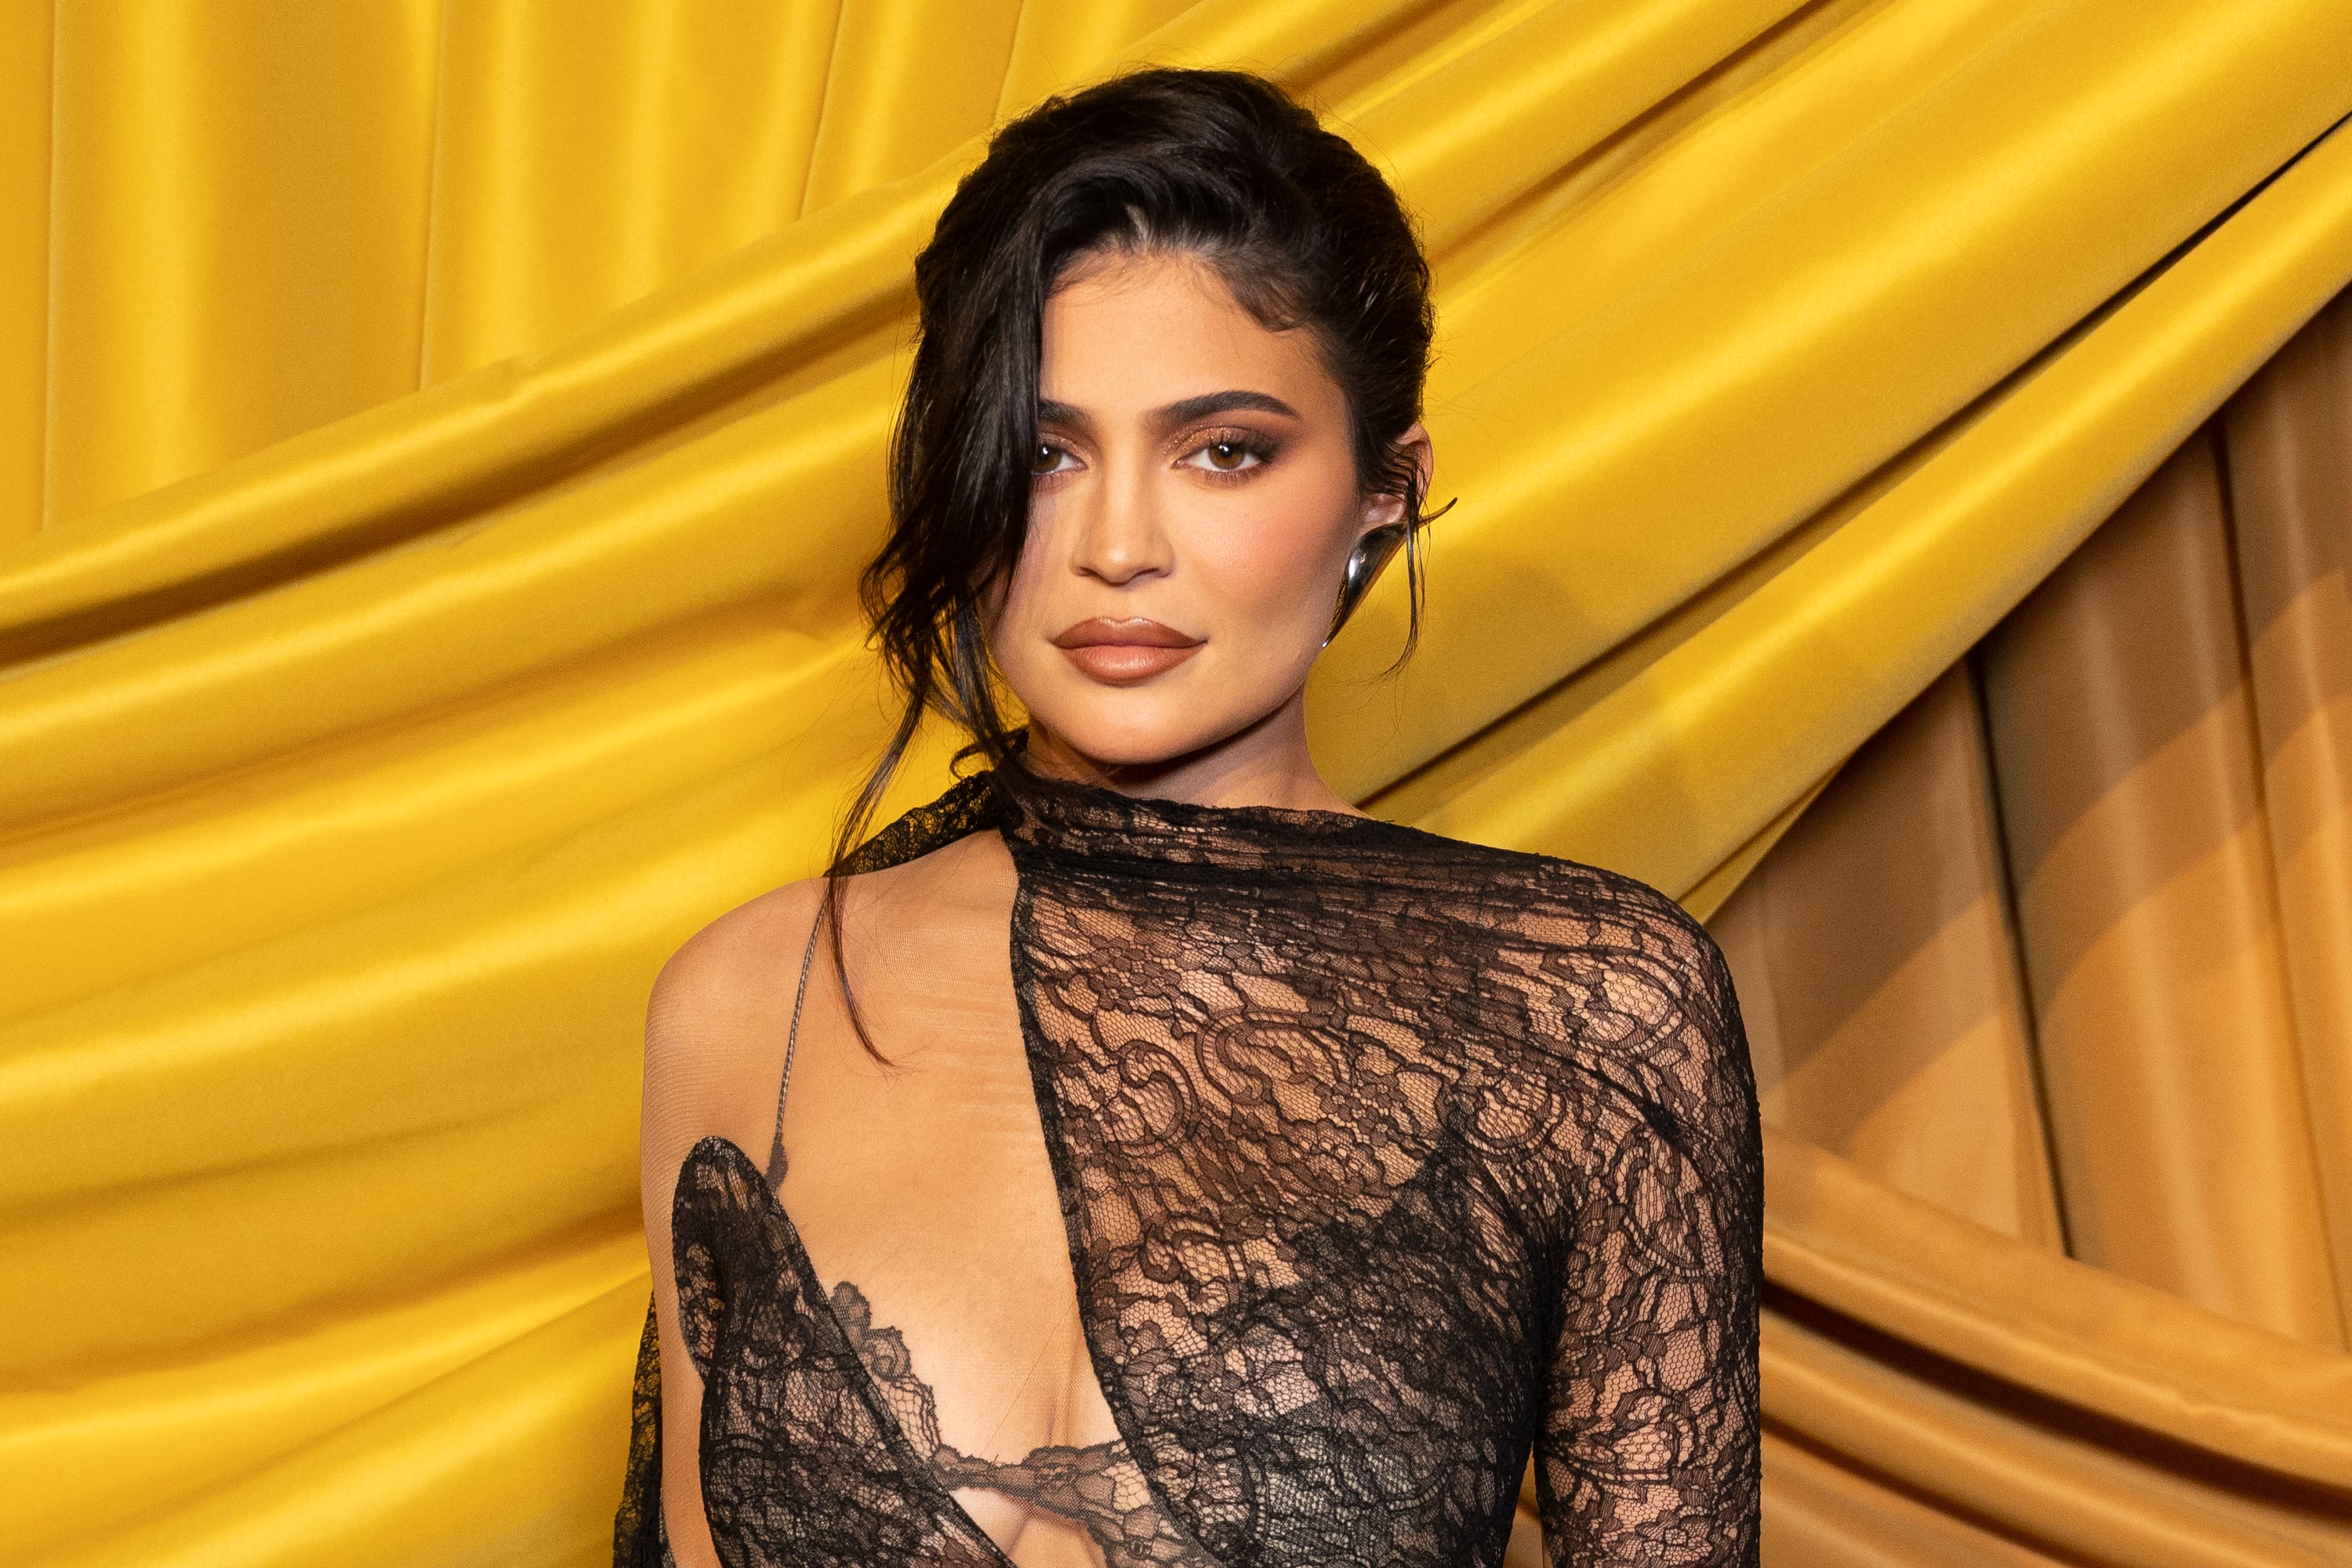 Kylie Jenner's fave book is nothing like you would expect